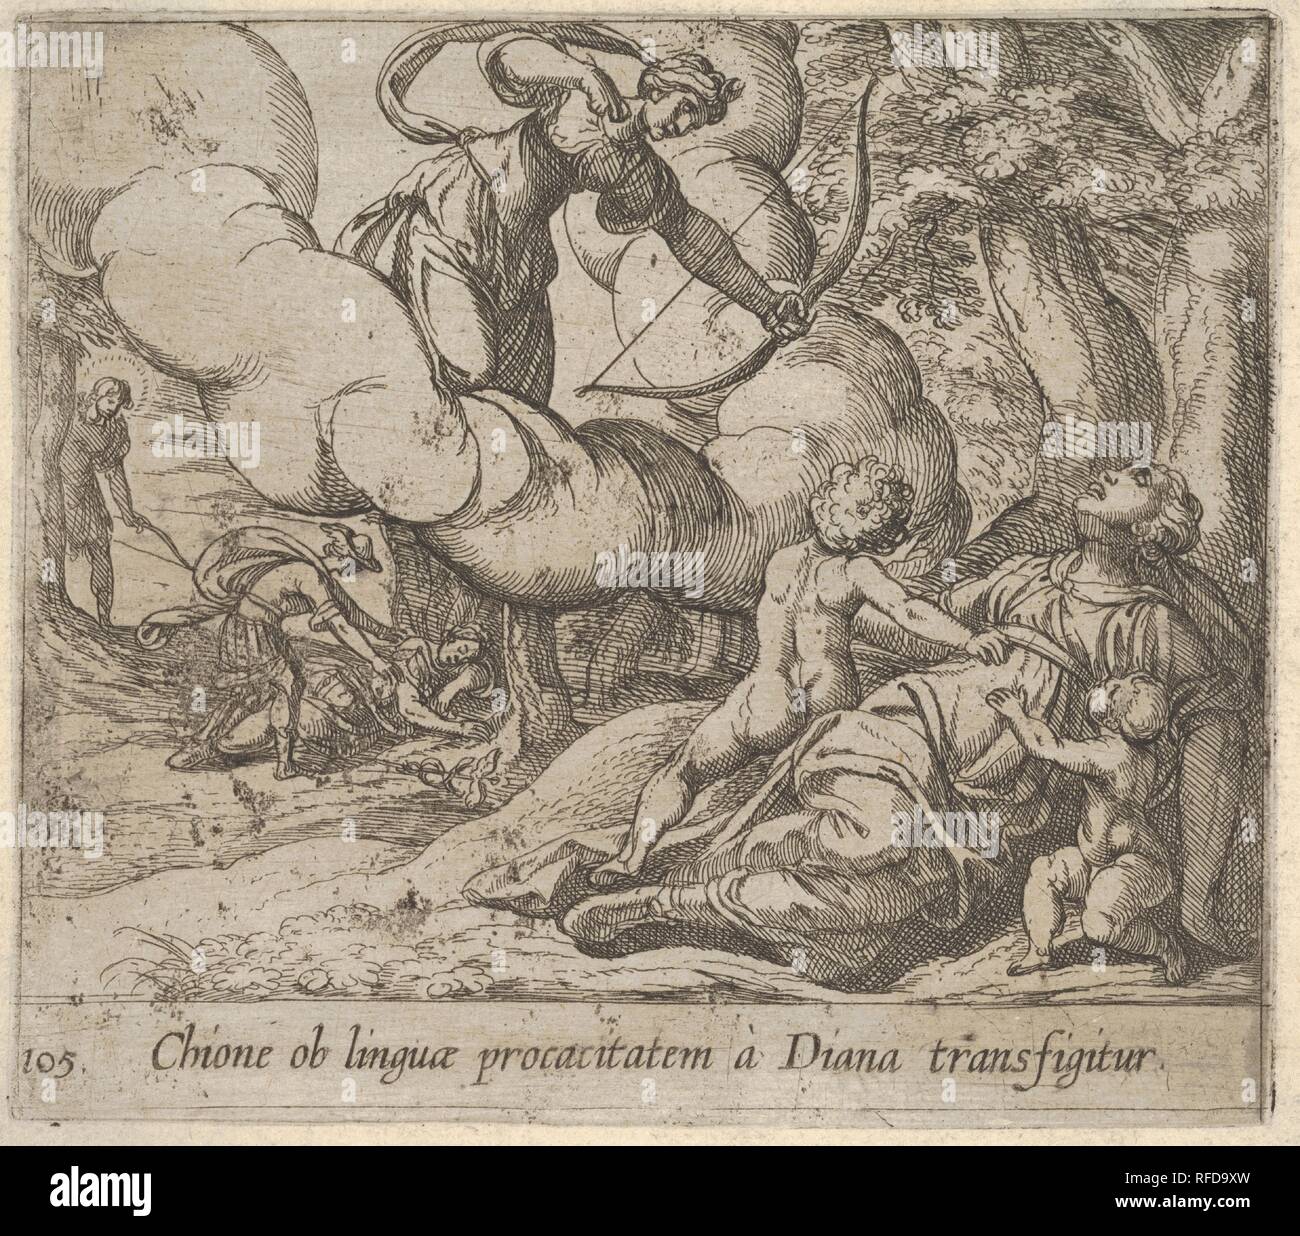 Plate 105: Diana aiming her bow toward Chione, who is accompanied by two children, in another scene at left Mercury approaches the sleeping Chione, from a series illustrating 'The Metamorphoses' of Ovid. Artist: Antonio Tempesta (Italian, Florence 1555-1630 Rome). Dimensions: Sheet: 4 3/4 x 5 1/4 in. (12 x 13.4 cm)  Plate: 4 1/8 x 4 11/16 in. (10.5 x 11.9 cm). Date: 1606. Museum: Metropolitan Museum of Art, New York, USA. Stock Photo